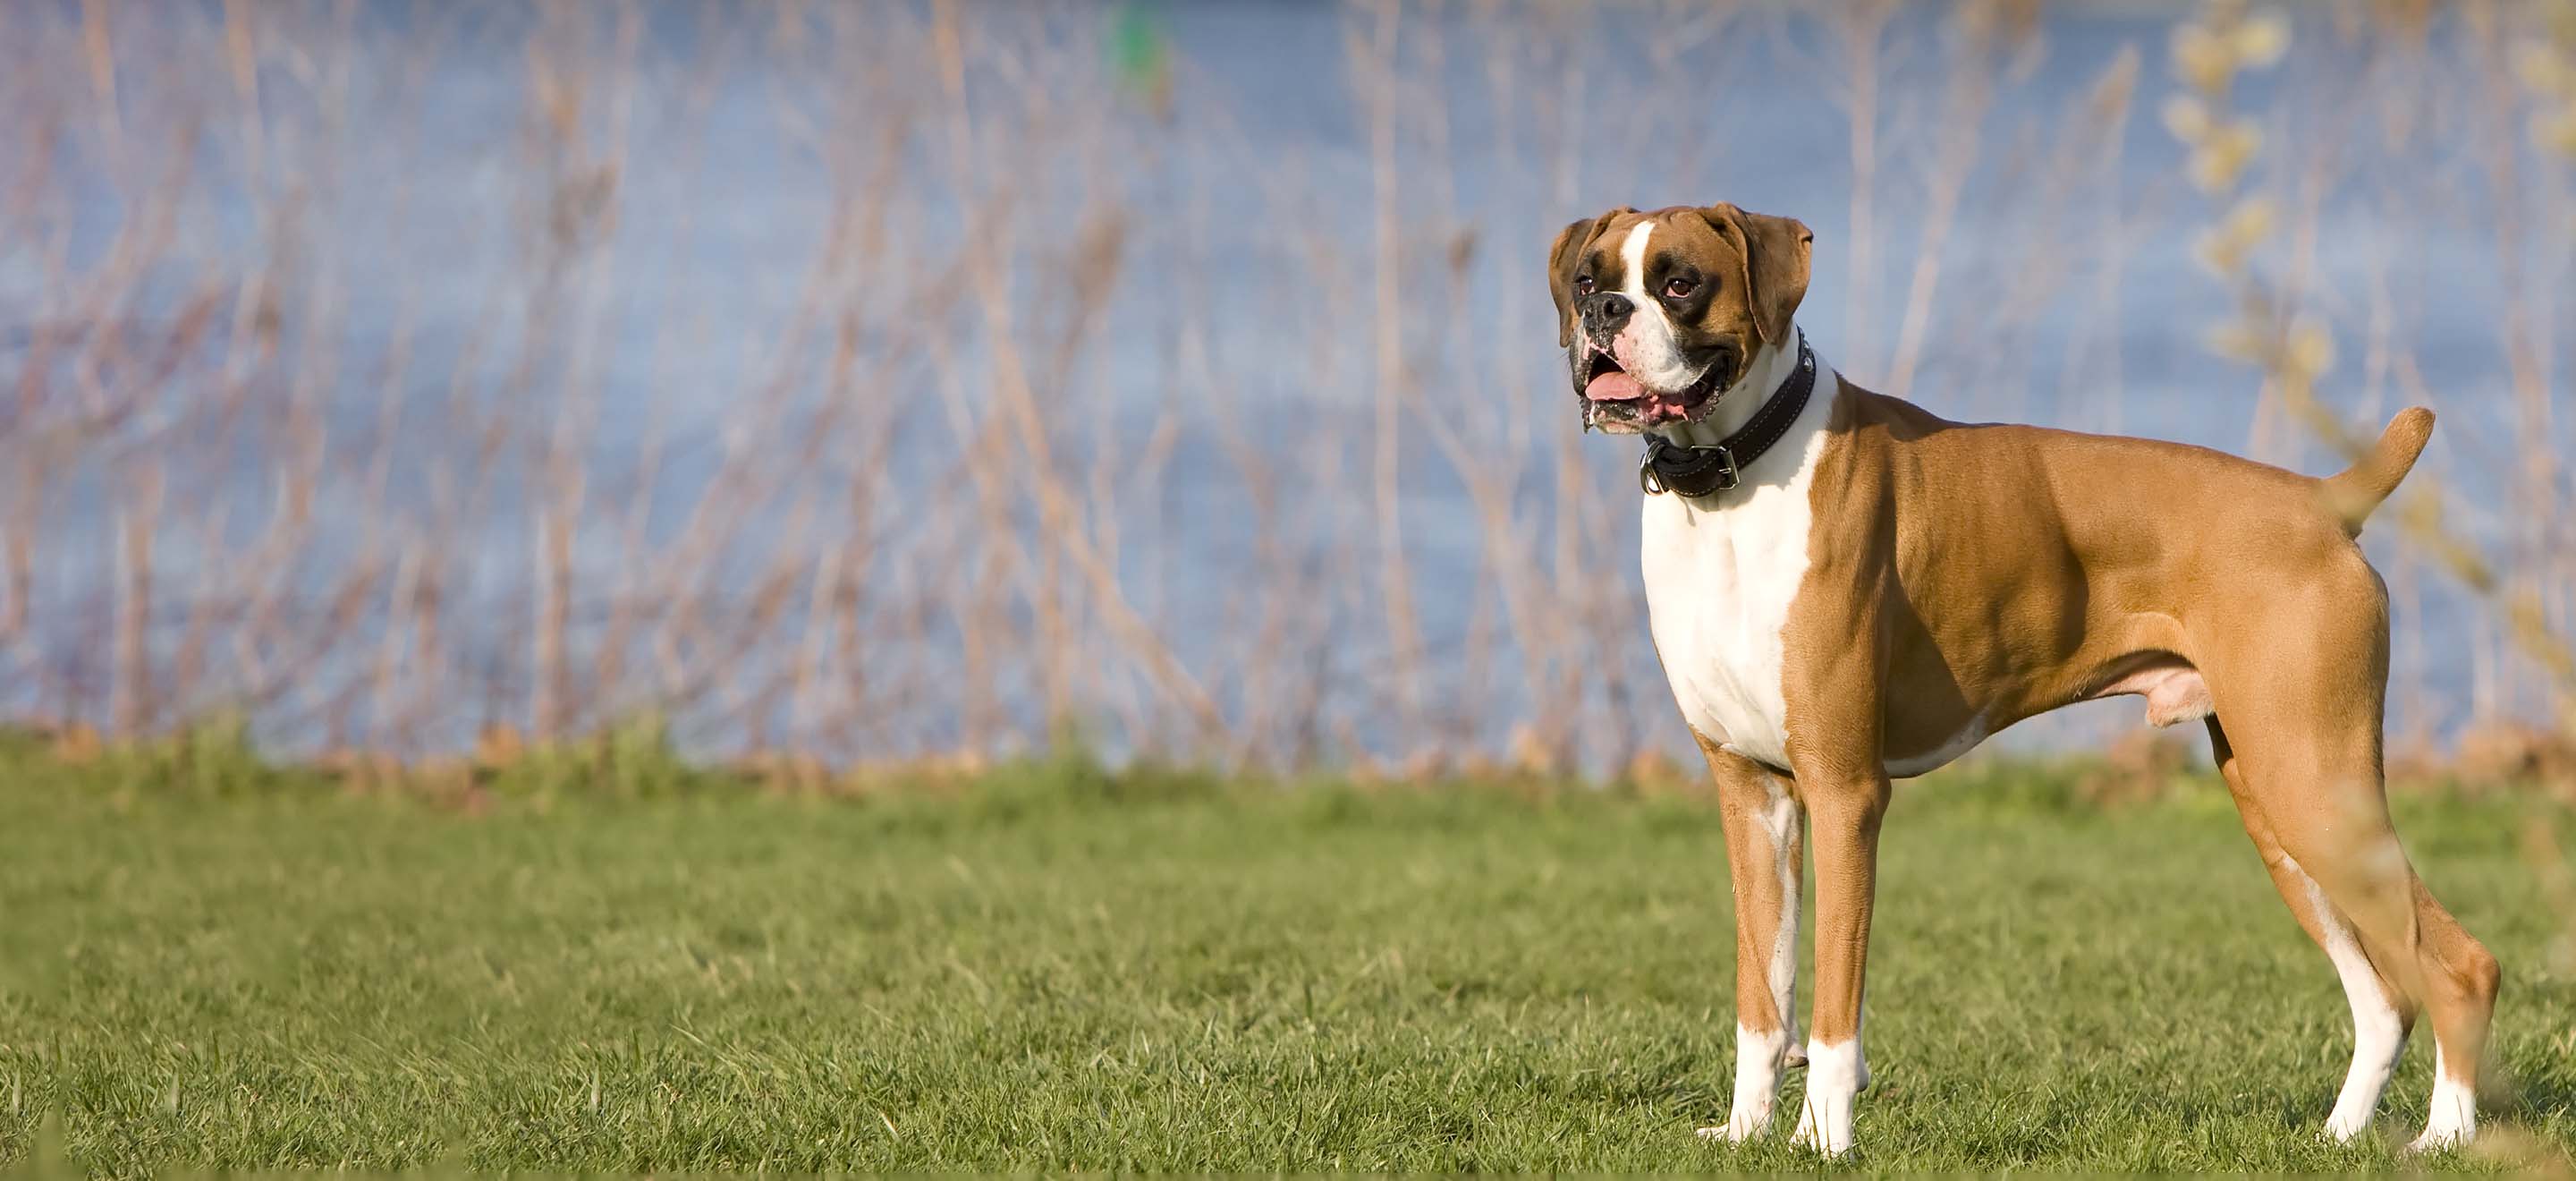 Boxer dog standing in a field near the lake image